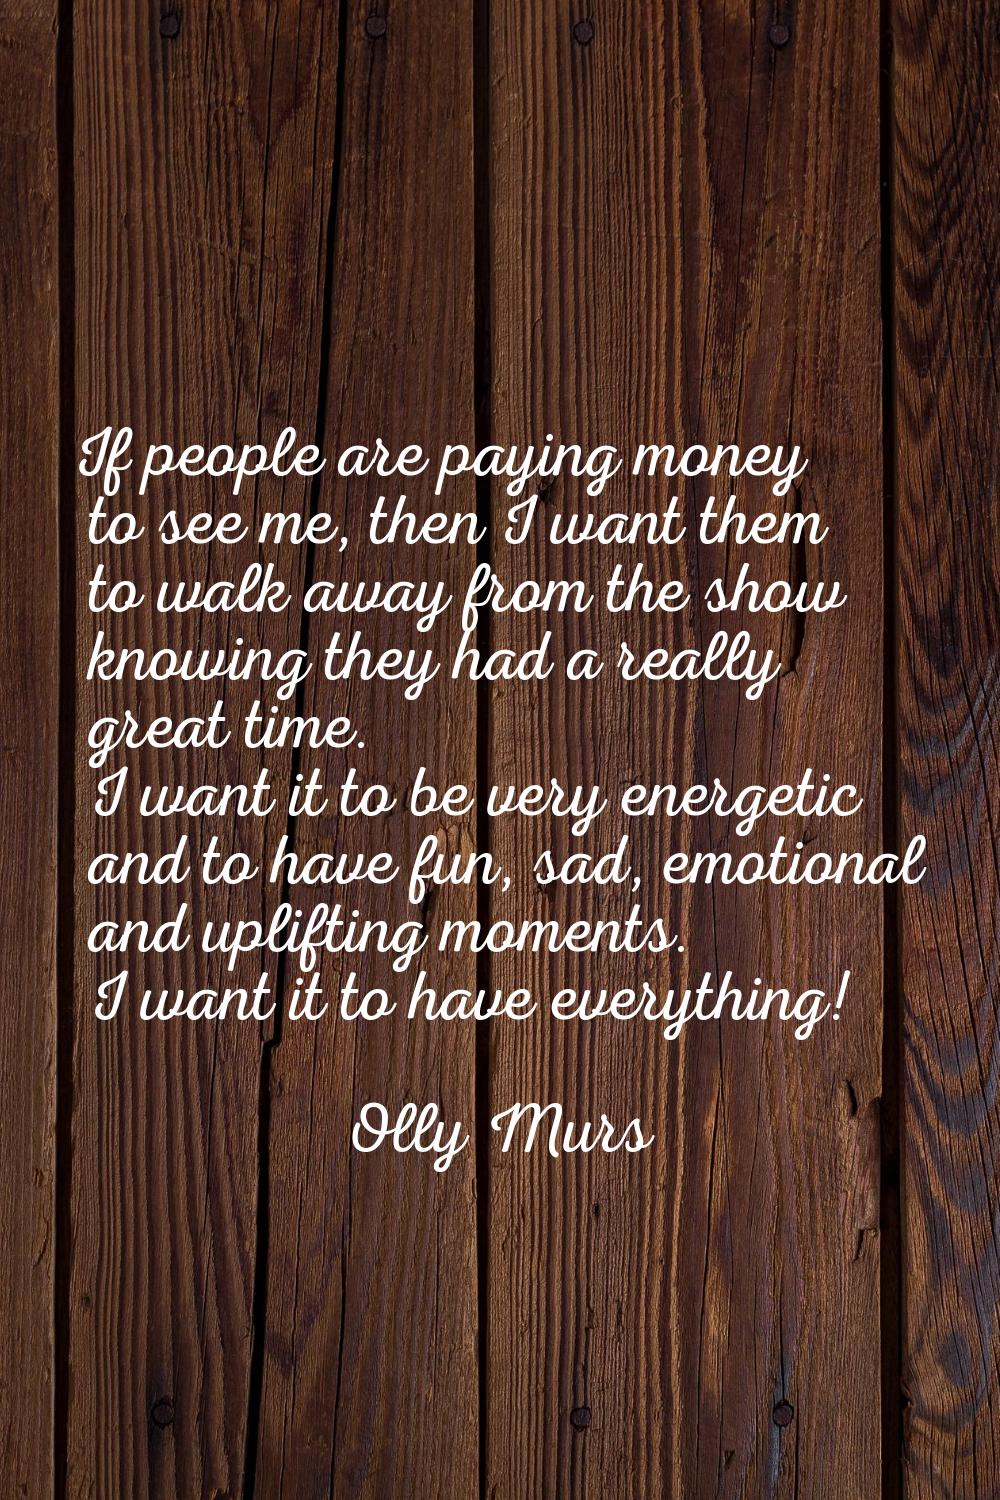 If people are paying money to see me, then I want them to walk away from the show knowing they had 